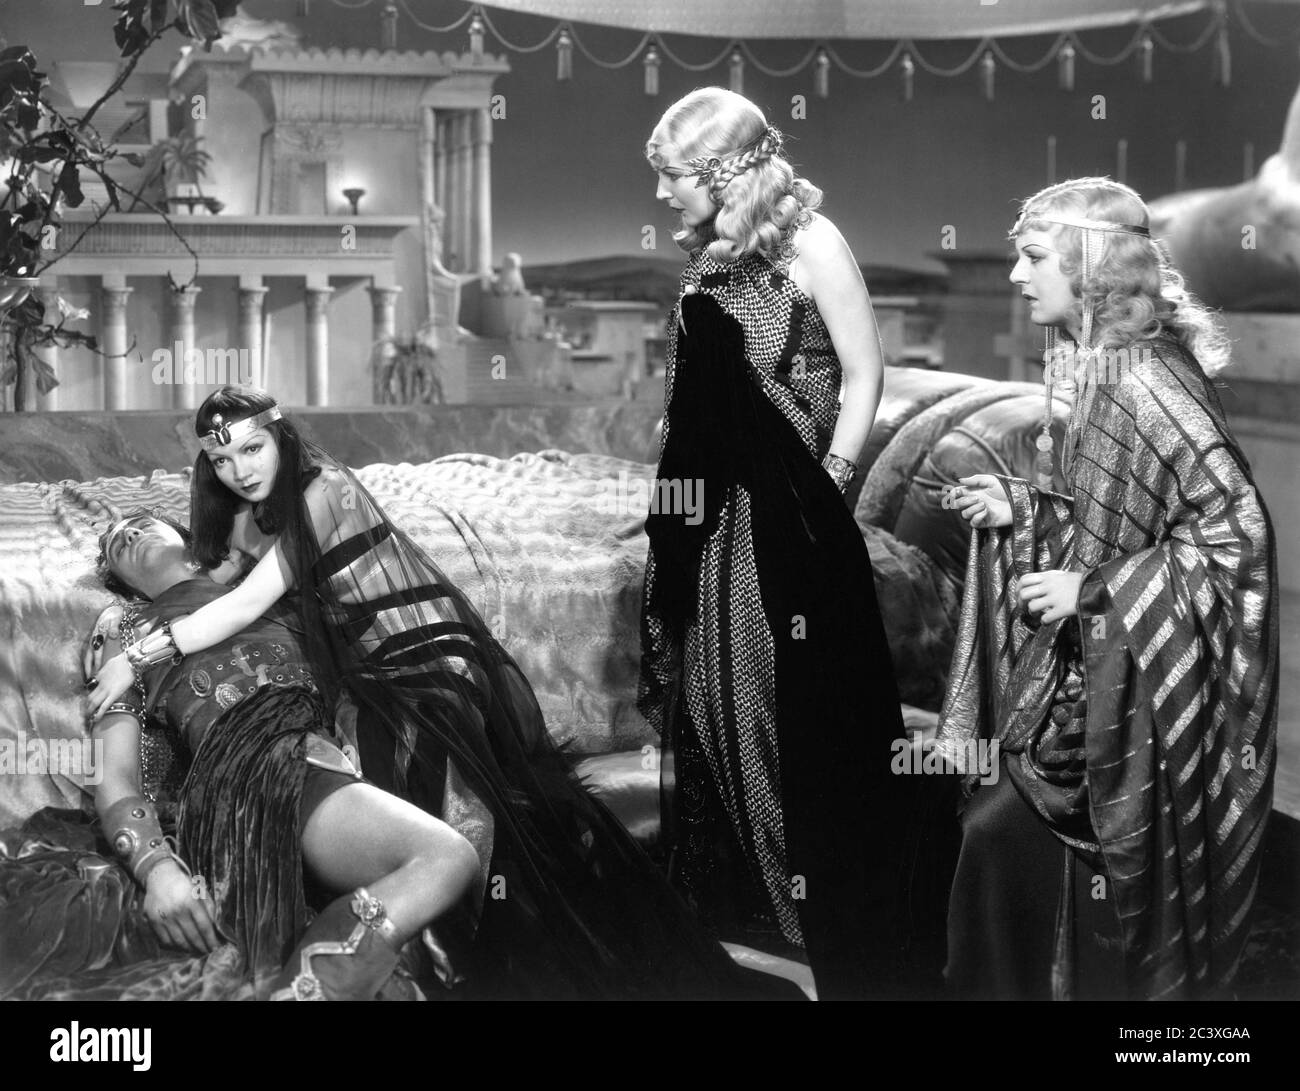 HENRY WILCOXON as dying Marc Antony CLAUDETTE COLBERT as Cleopatra ELEANOR PHELPS as Charmian and GRACE DURKIN as Iras in CLEOPATRA 1934 director CECIL B. DeMILLE Miss Colbert costume Travis Banton photo by Ray Jones Paramount Pictures Stock Photo